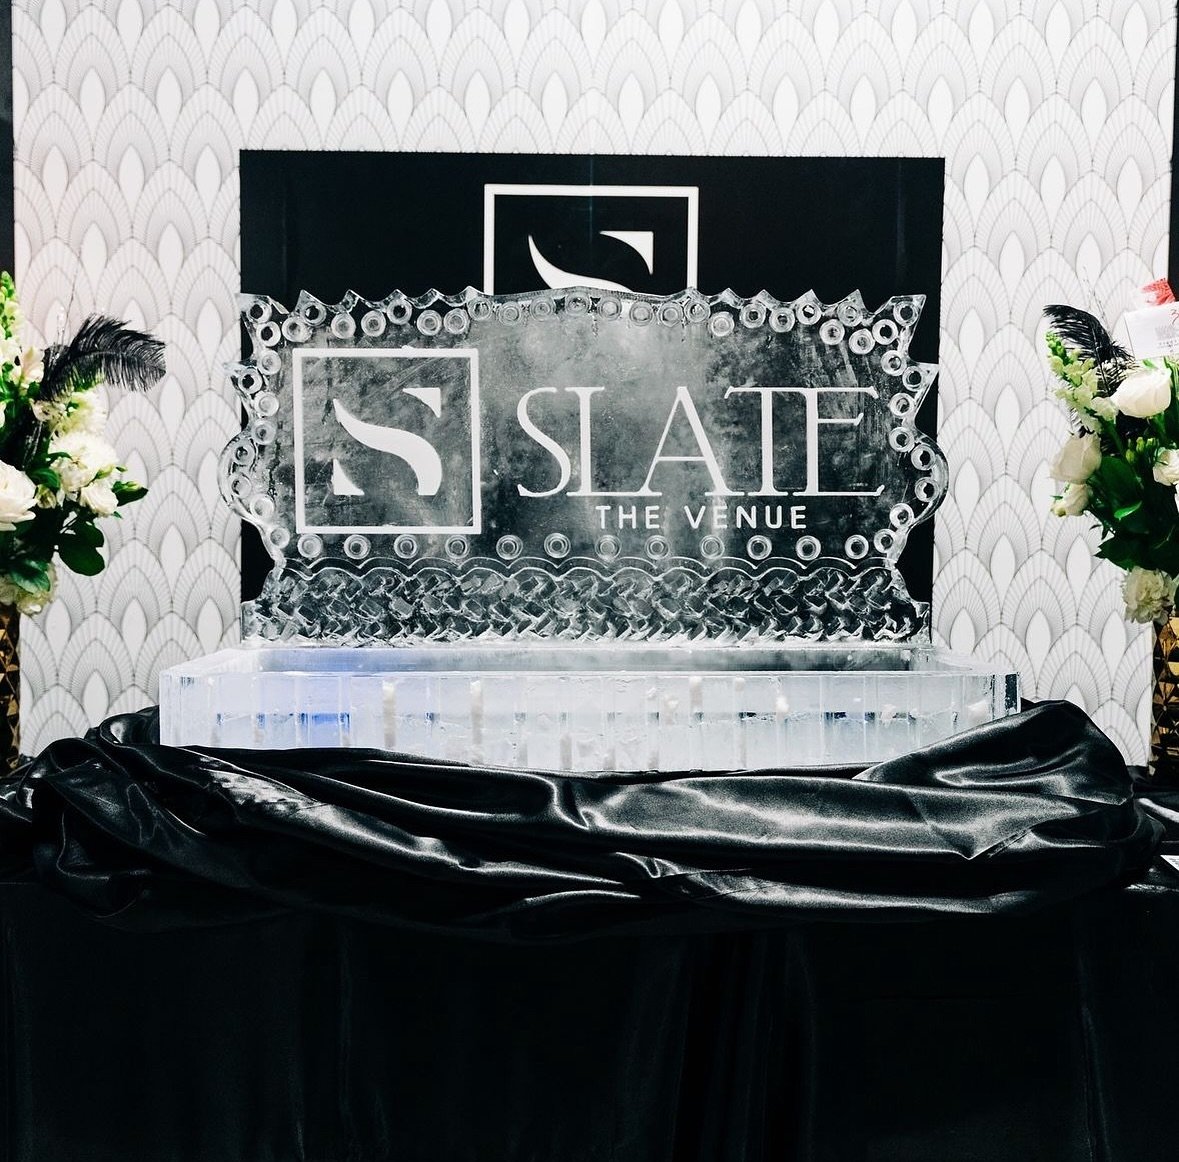 Slate The Venue&hellip;where beauty and elegance come together to create memorable celebrations! Learn more about hosting your next event with us at www.slatethevenue.com today! ✨